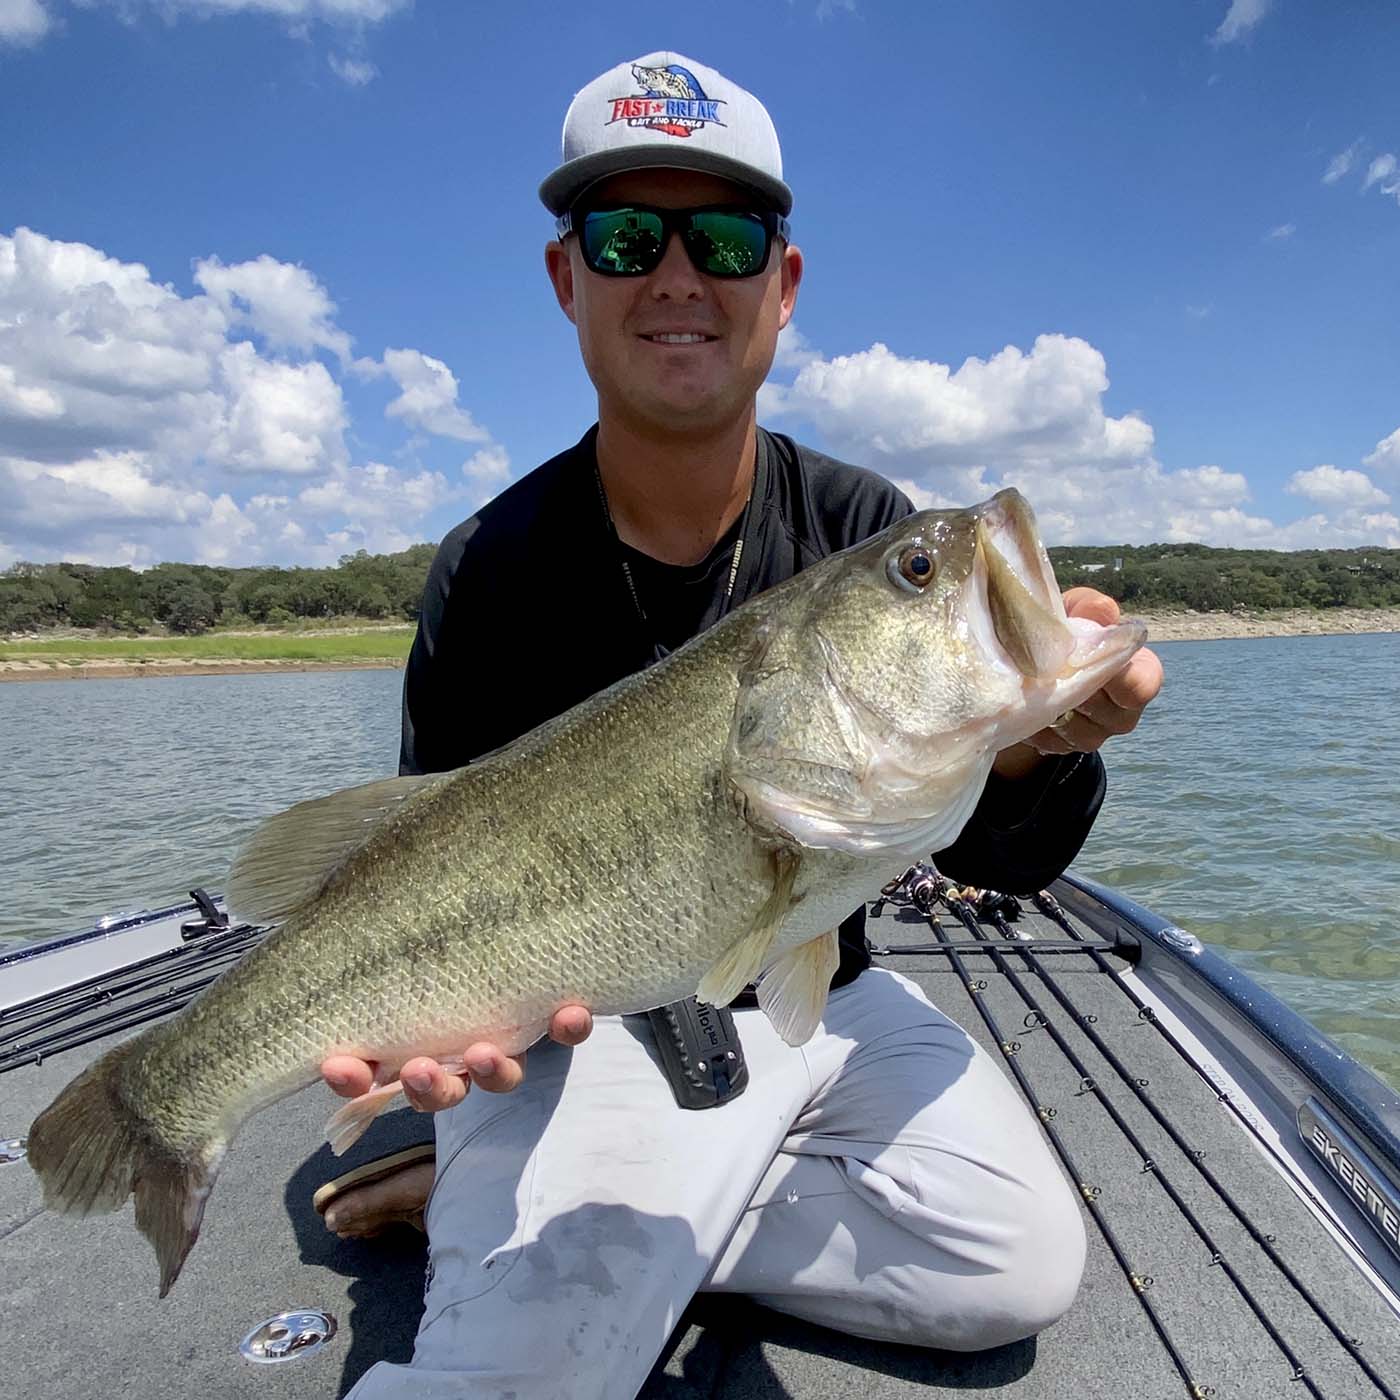 The Lure: Bass fishing on Lake Travis is fast, easy